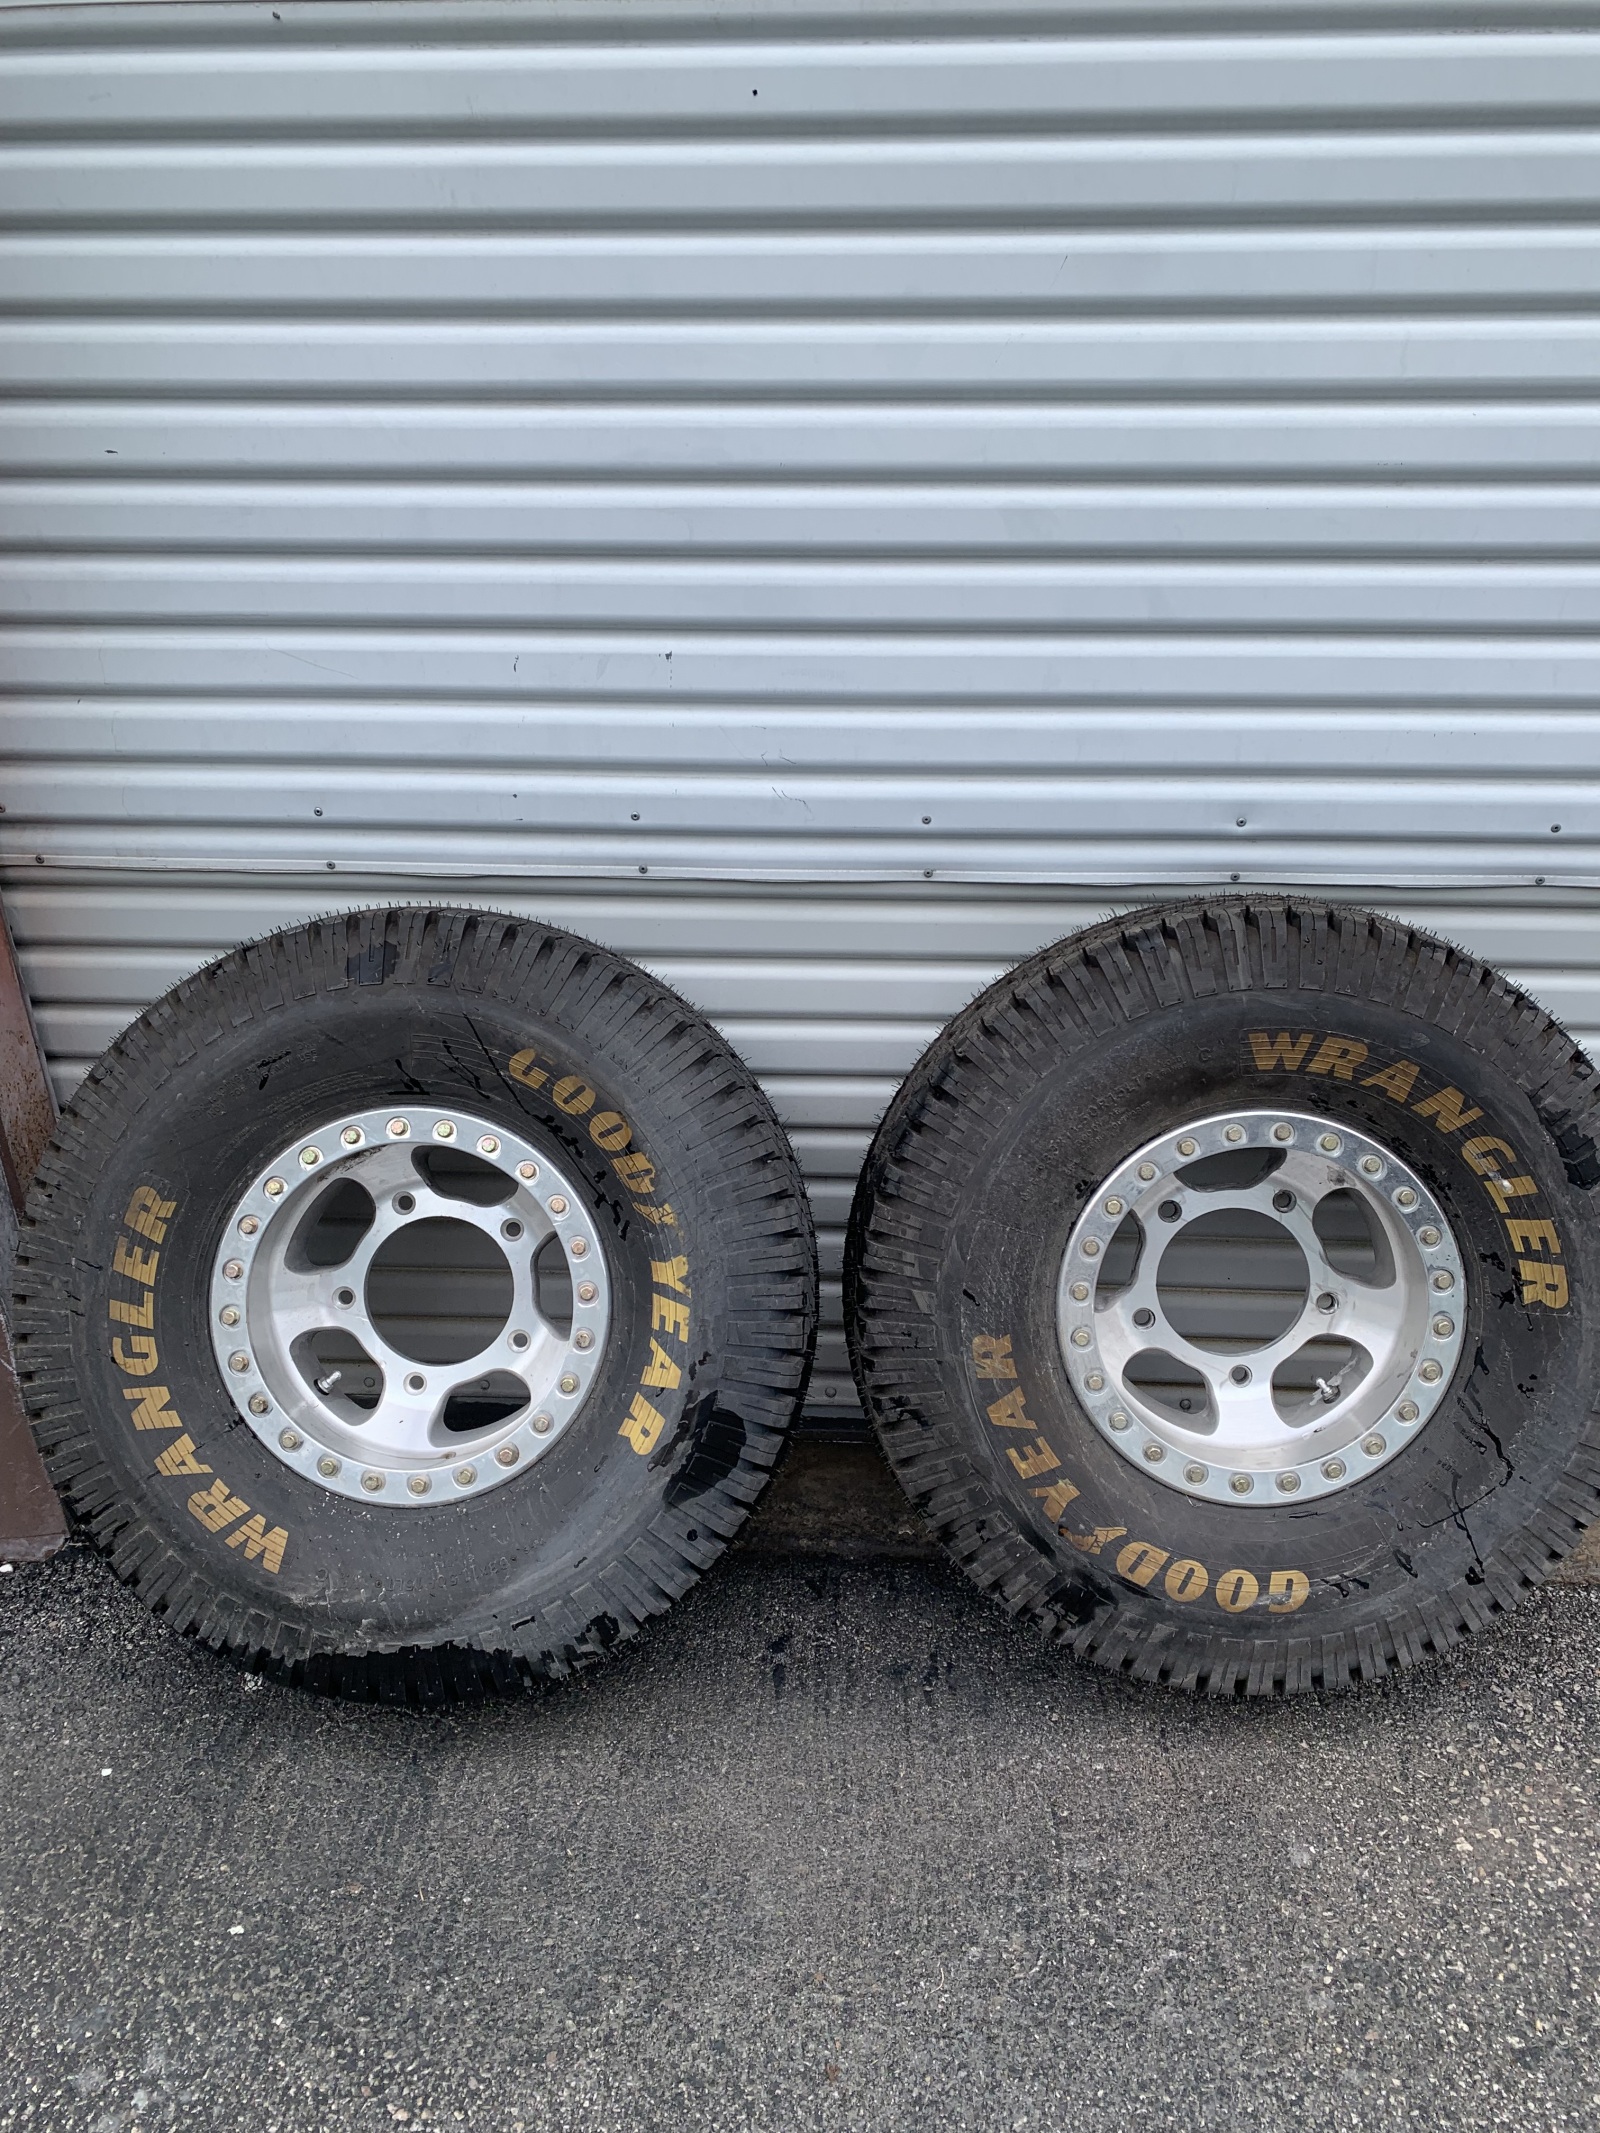 For Sale: 33x11.50x15 Goodyear BTR wheels and tires - photo0